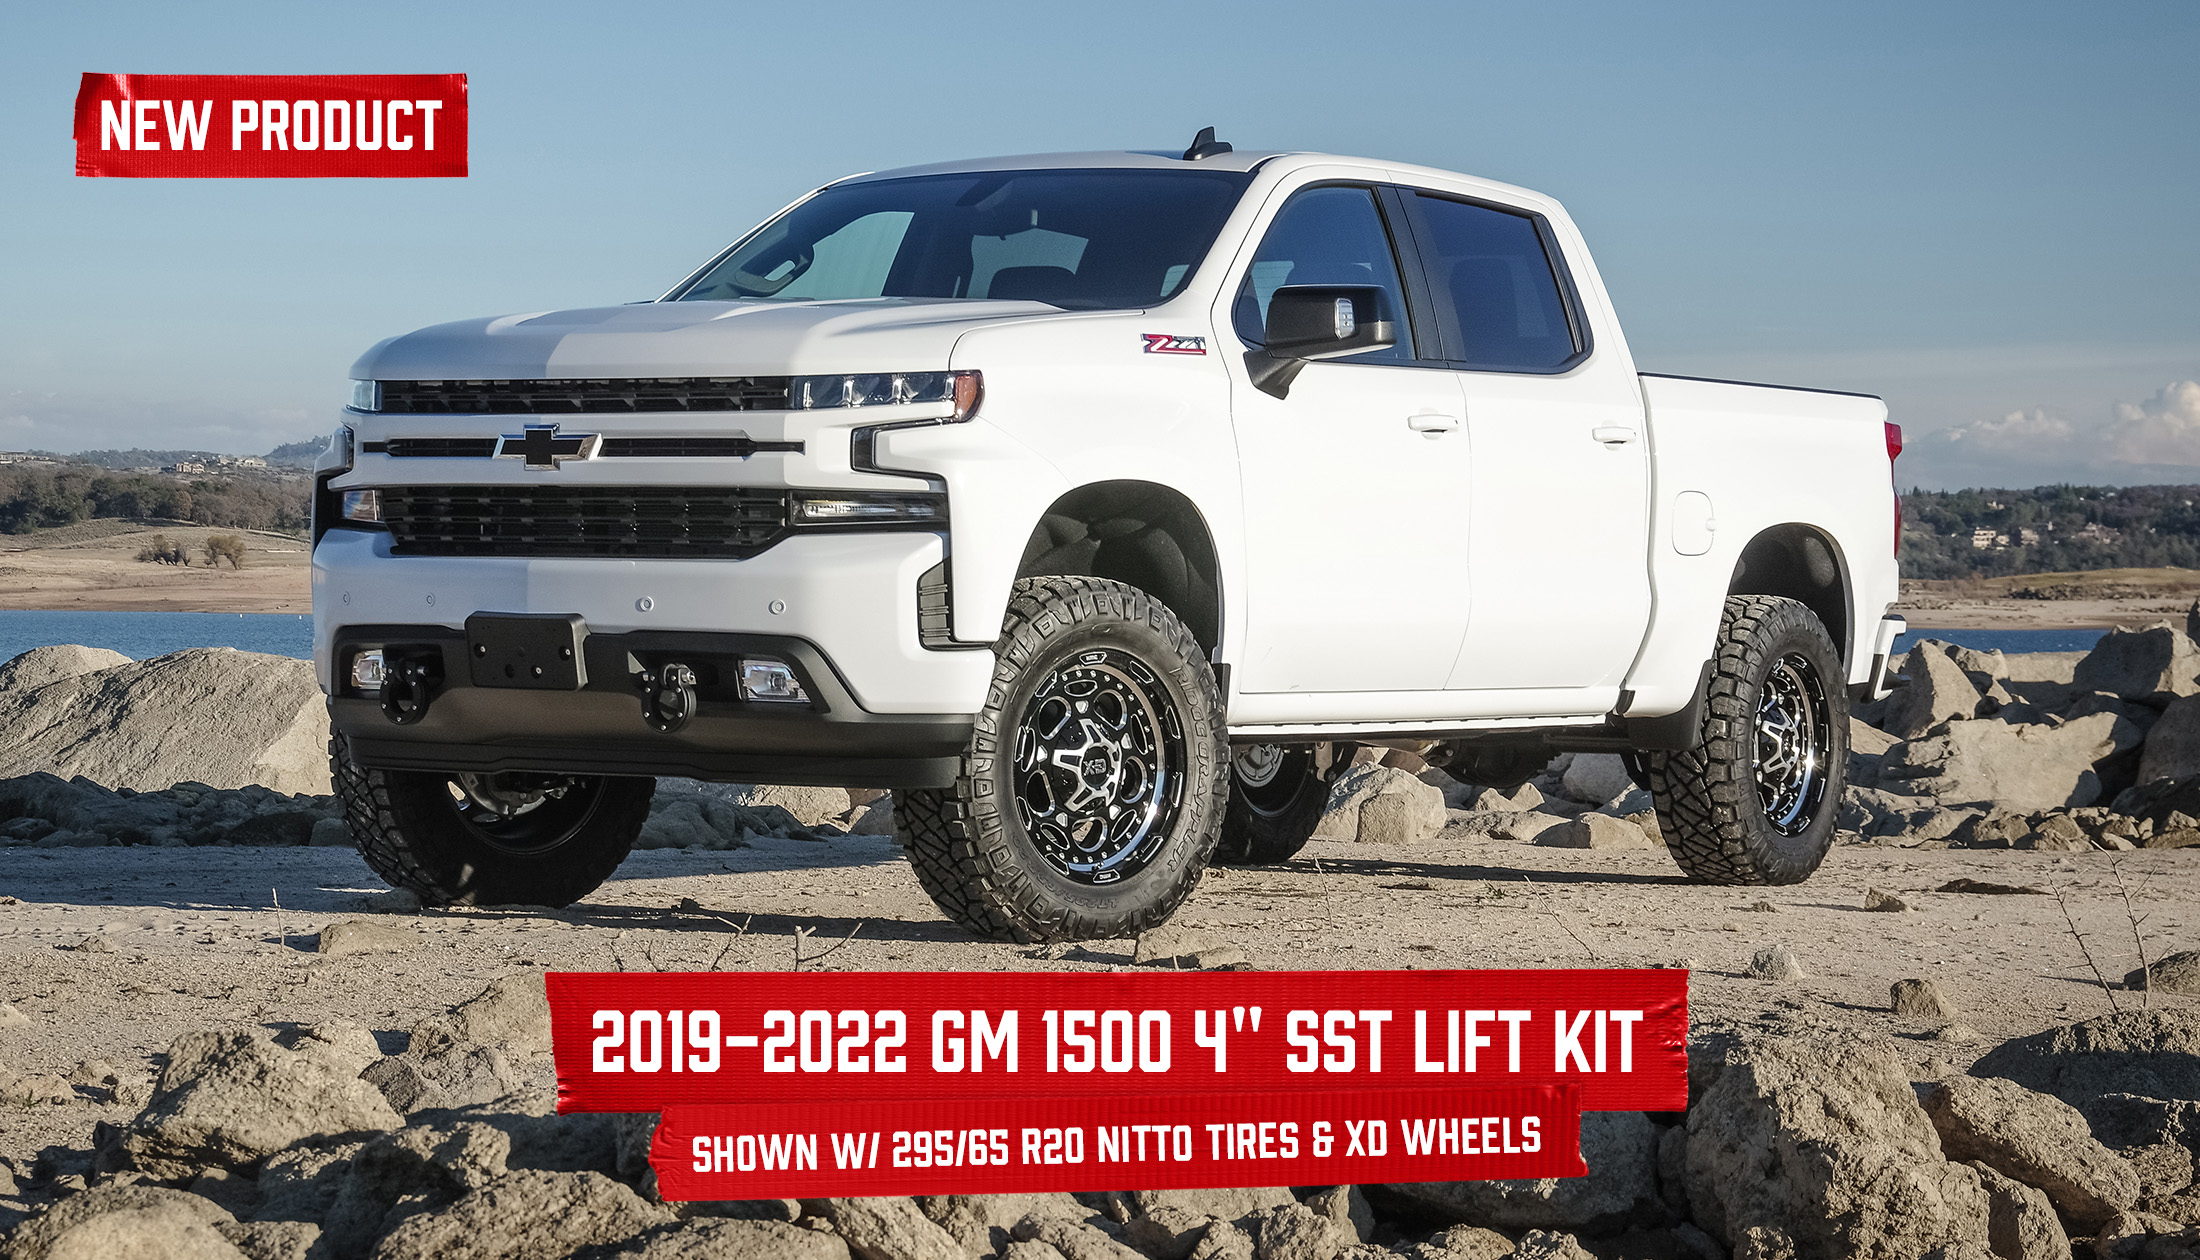 Readylift Now Shipping All New 40″ Sst Lift Kit Gmcchevy 1500 2019